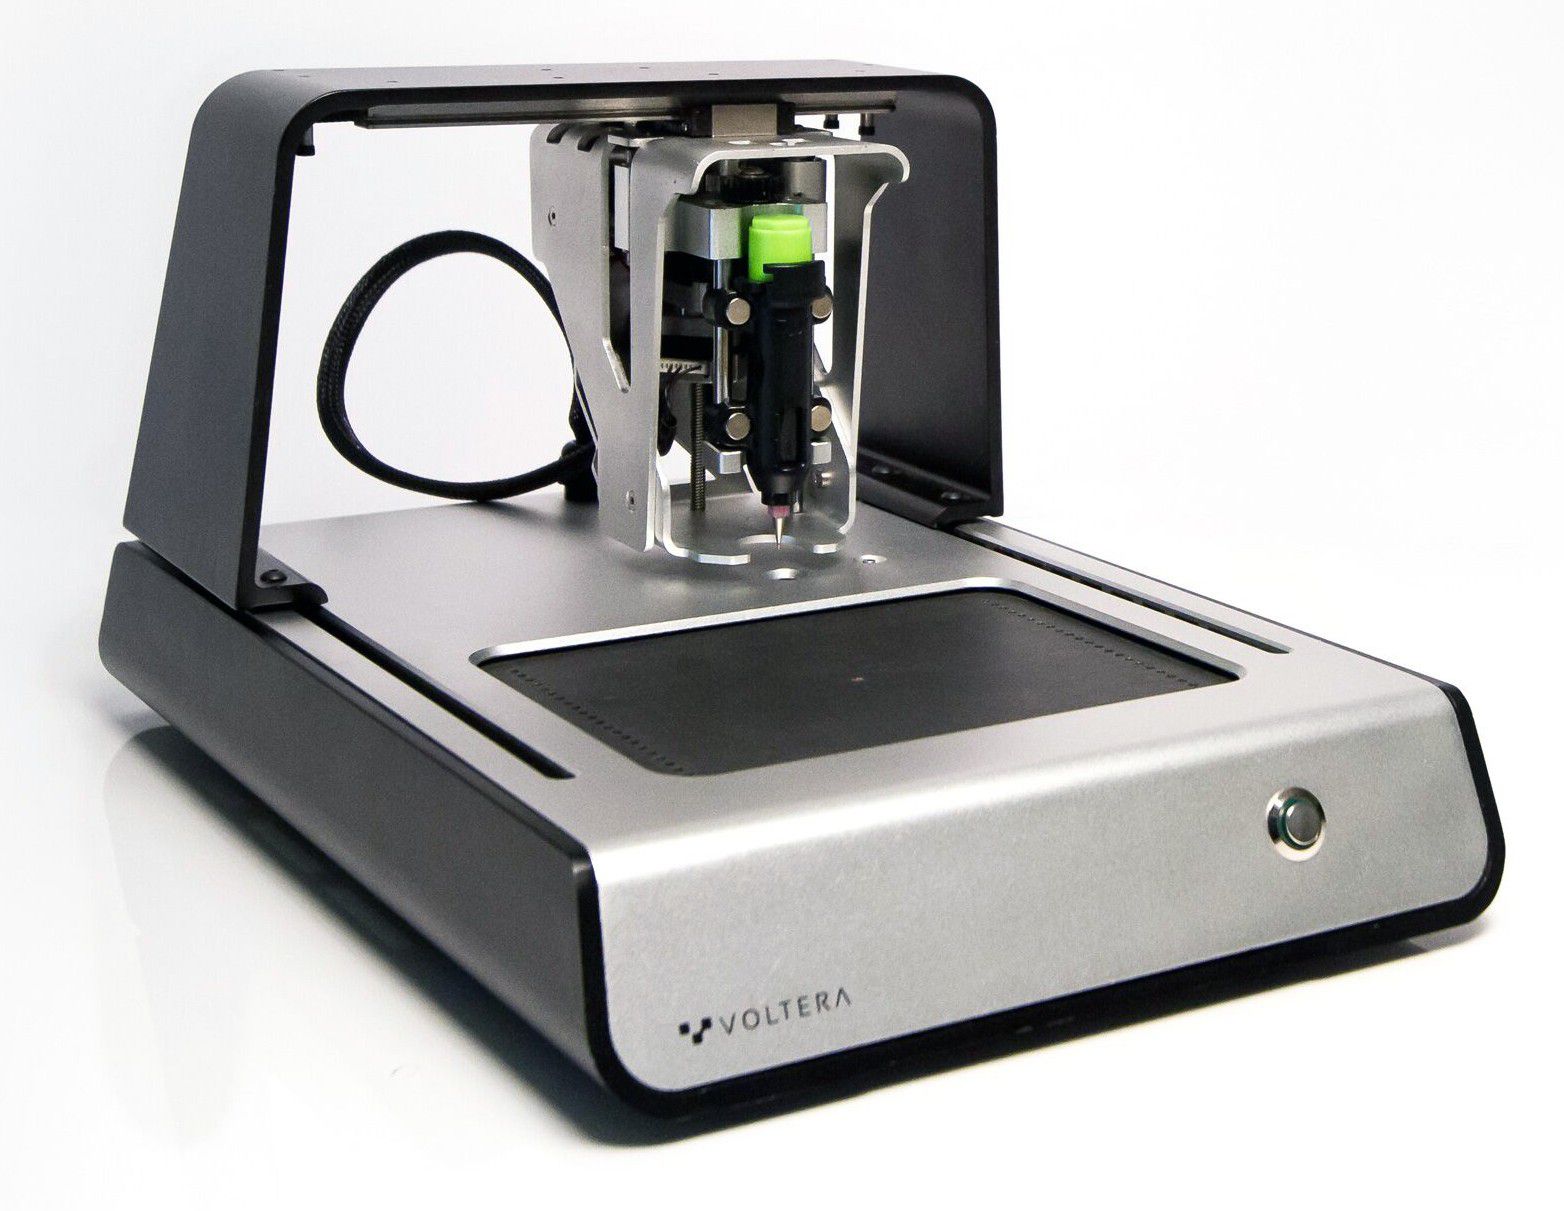 Voltera One PCB Prototyping System